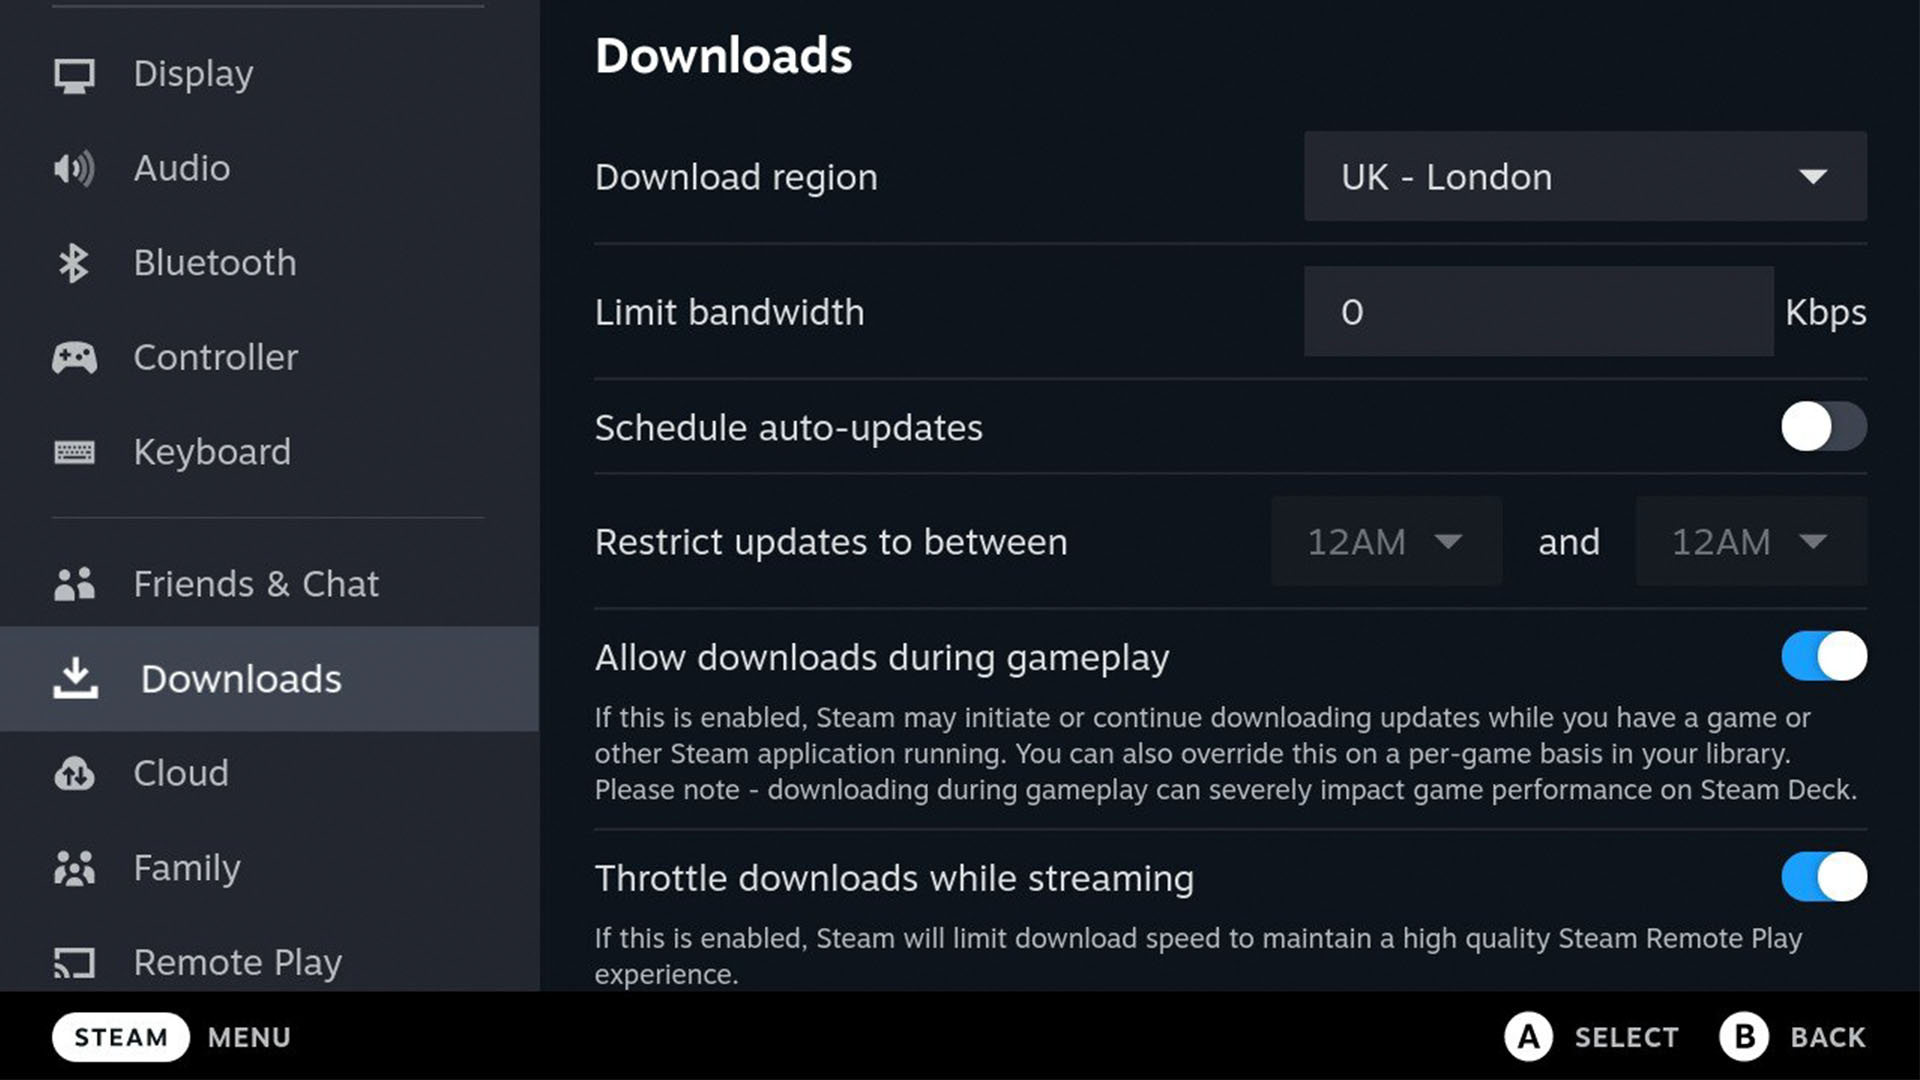 Downloading games on the Steam Deck